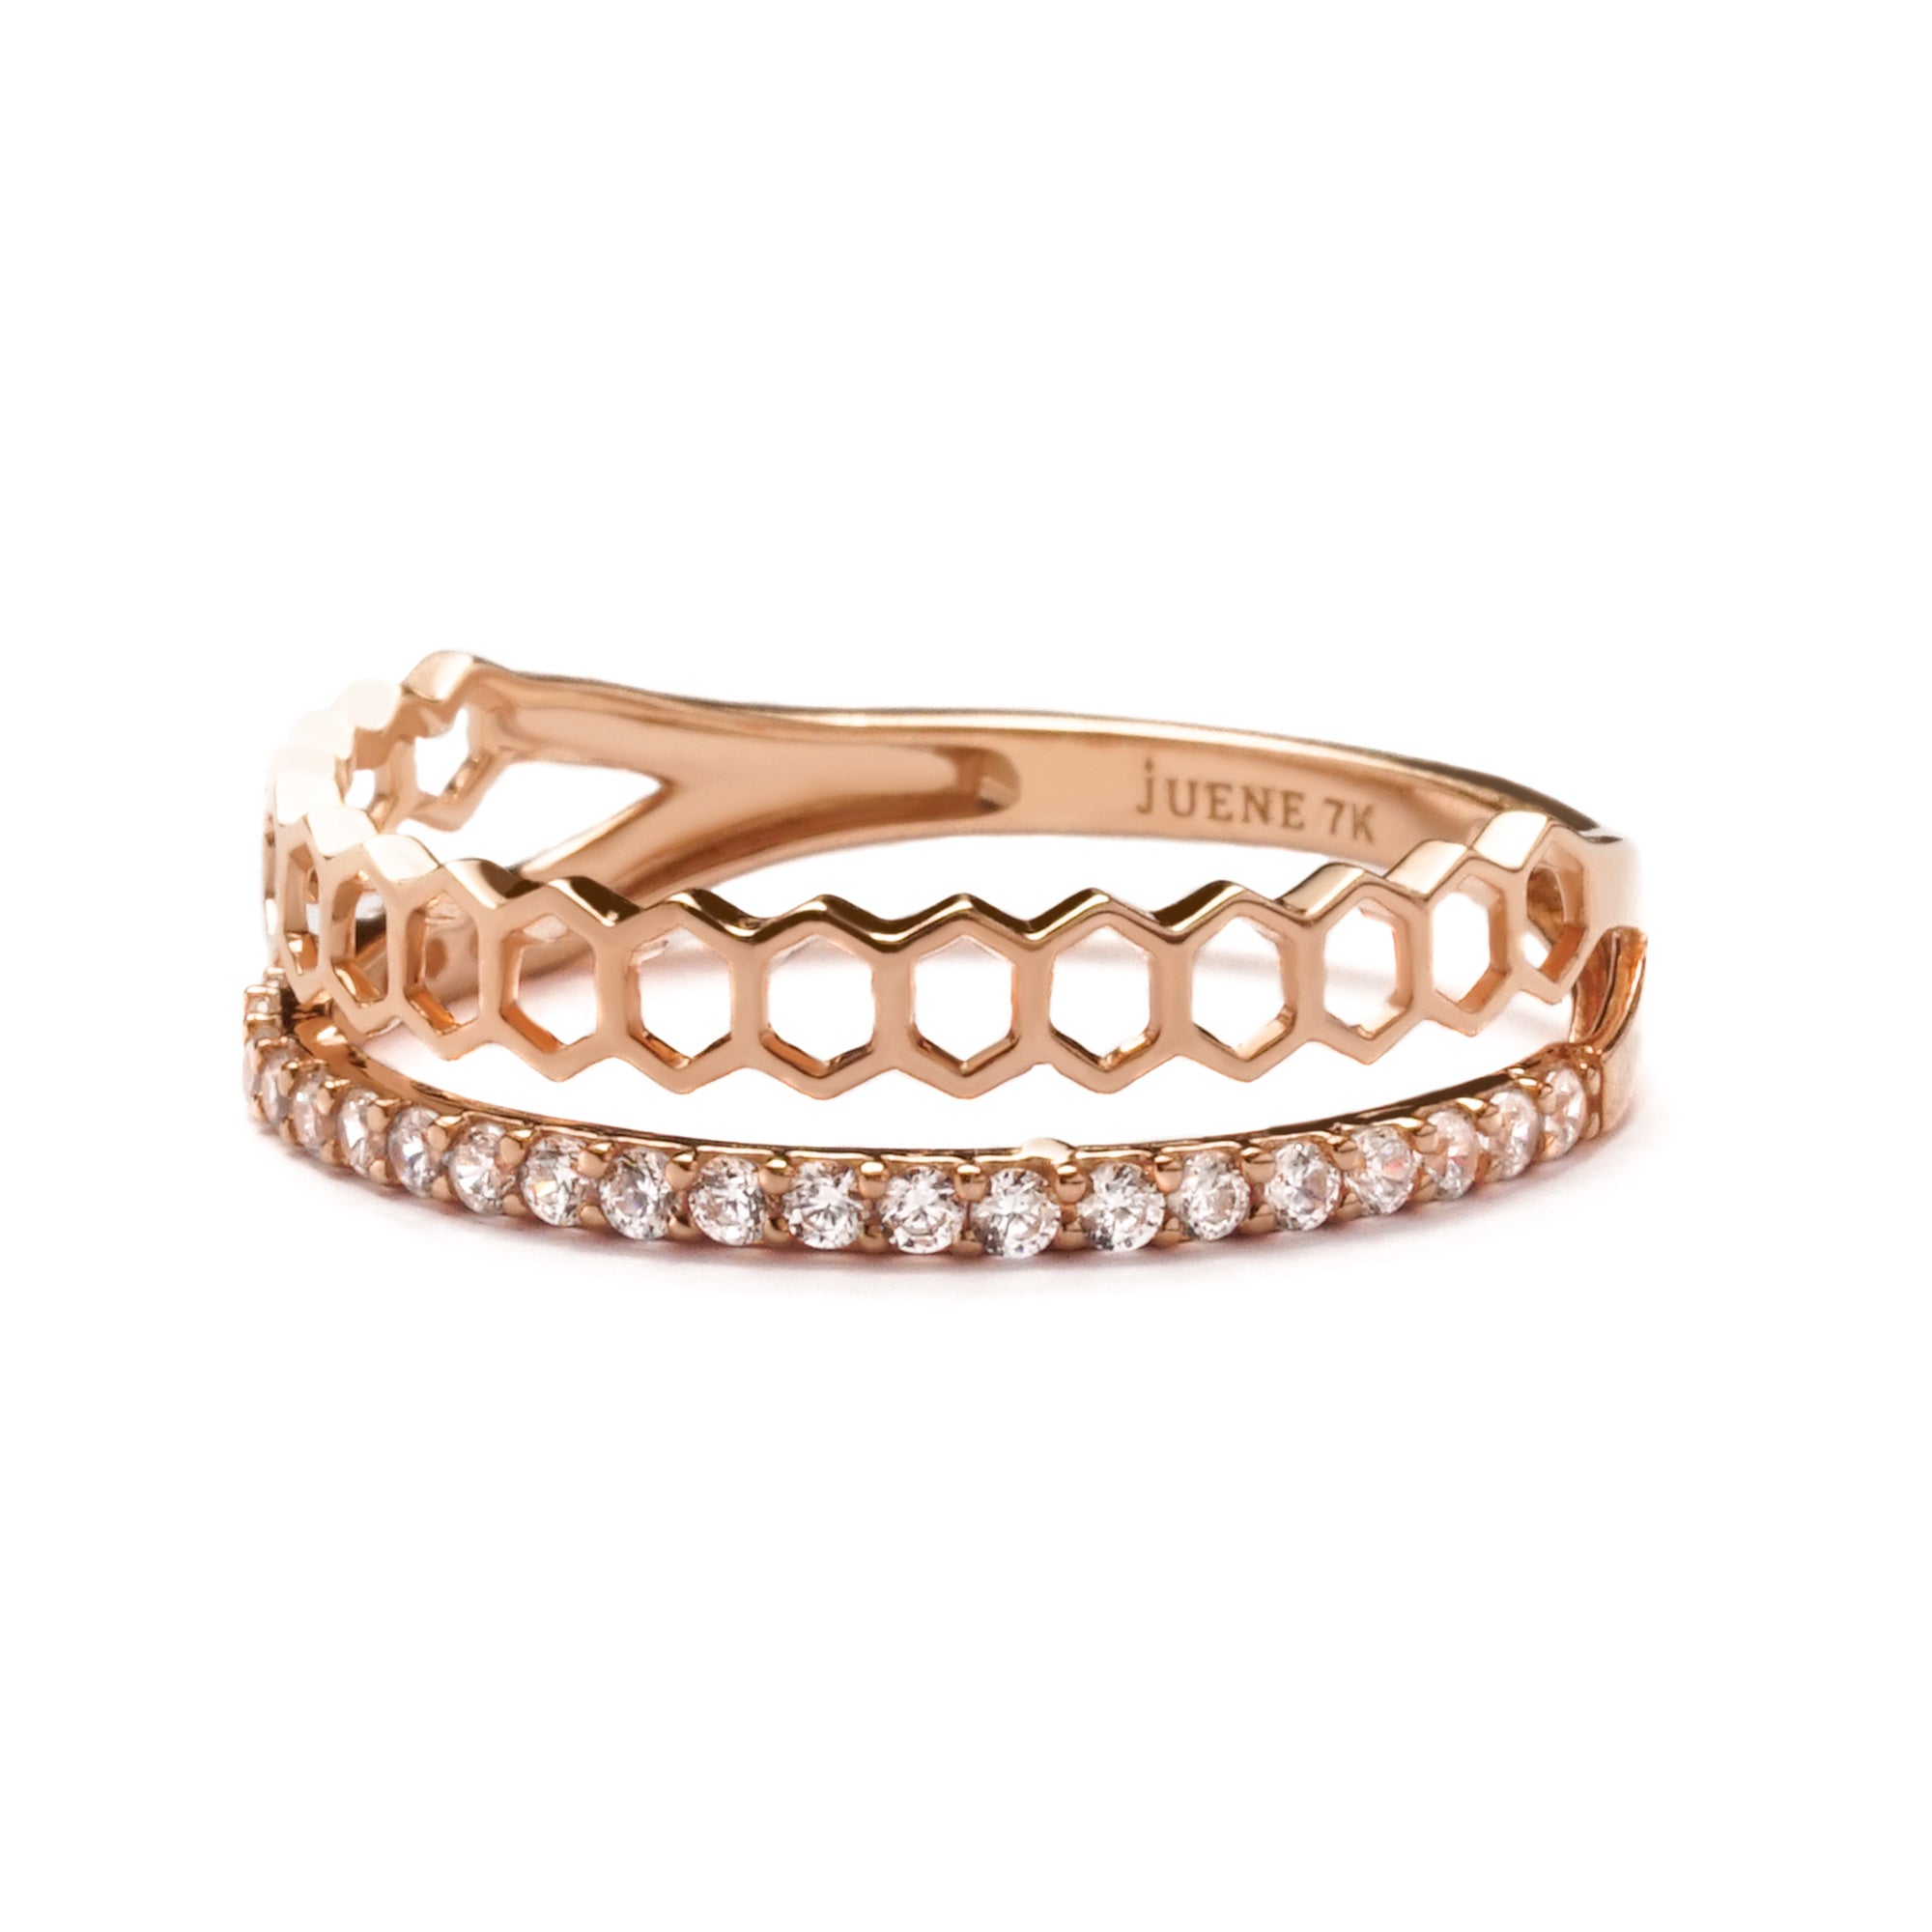 Kyra Gold Ring - Modest Collection - Juene Jewelry